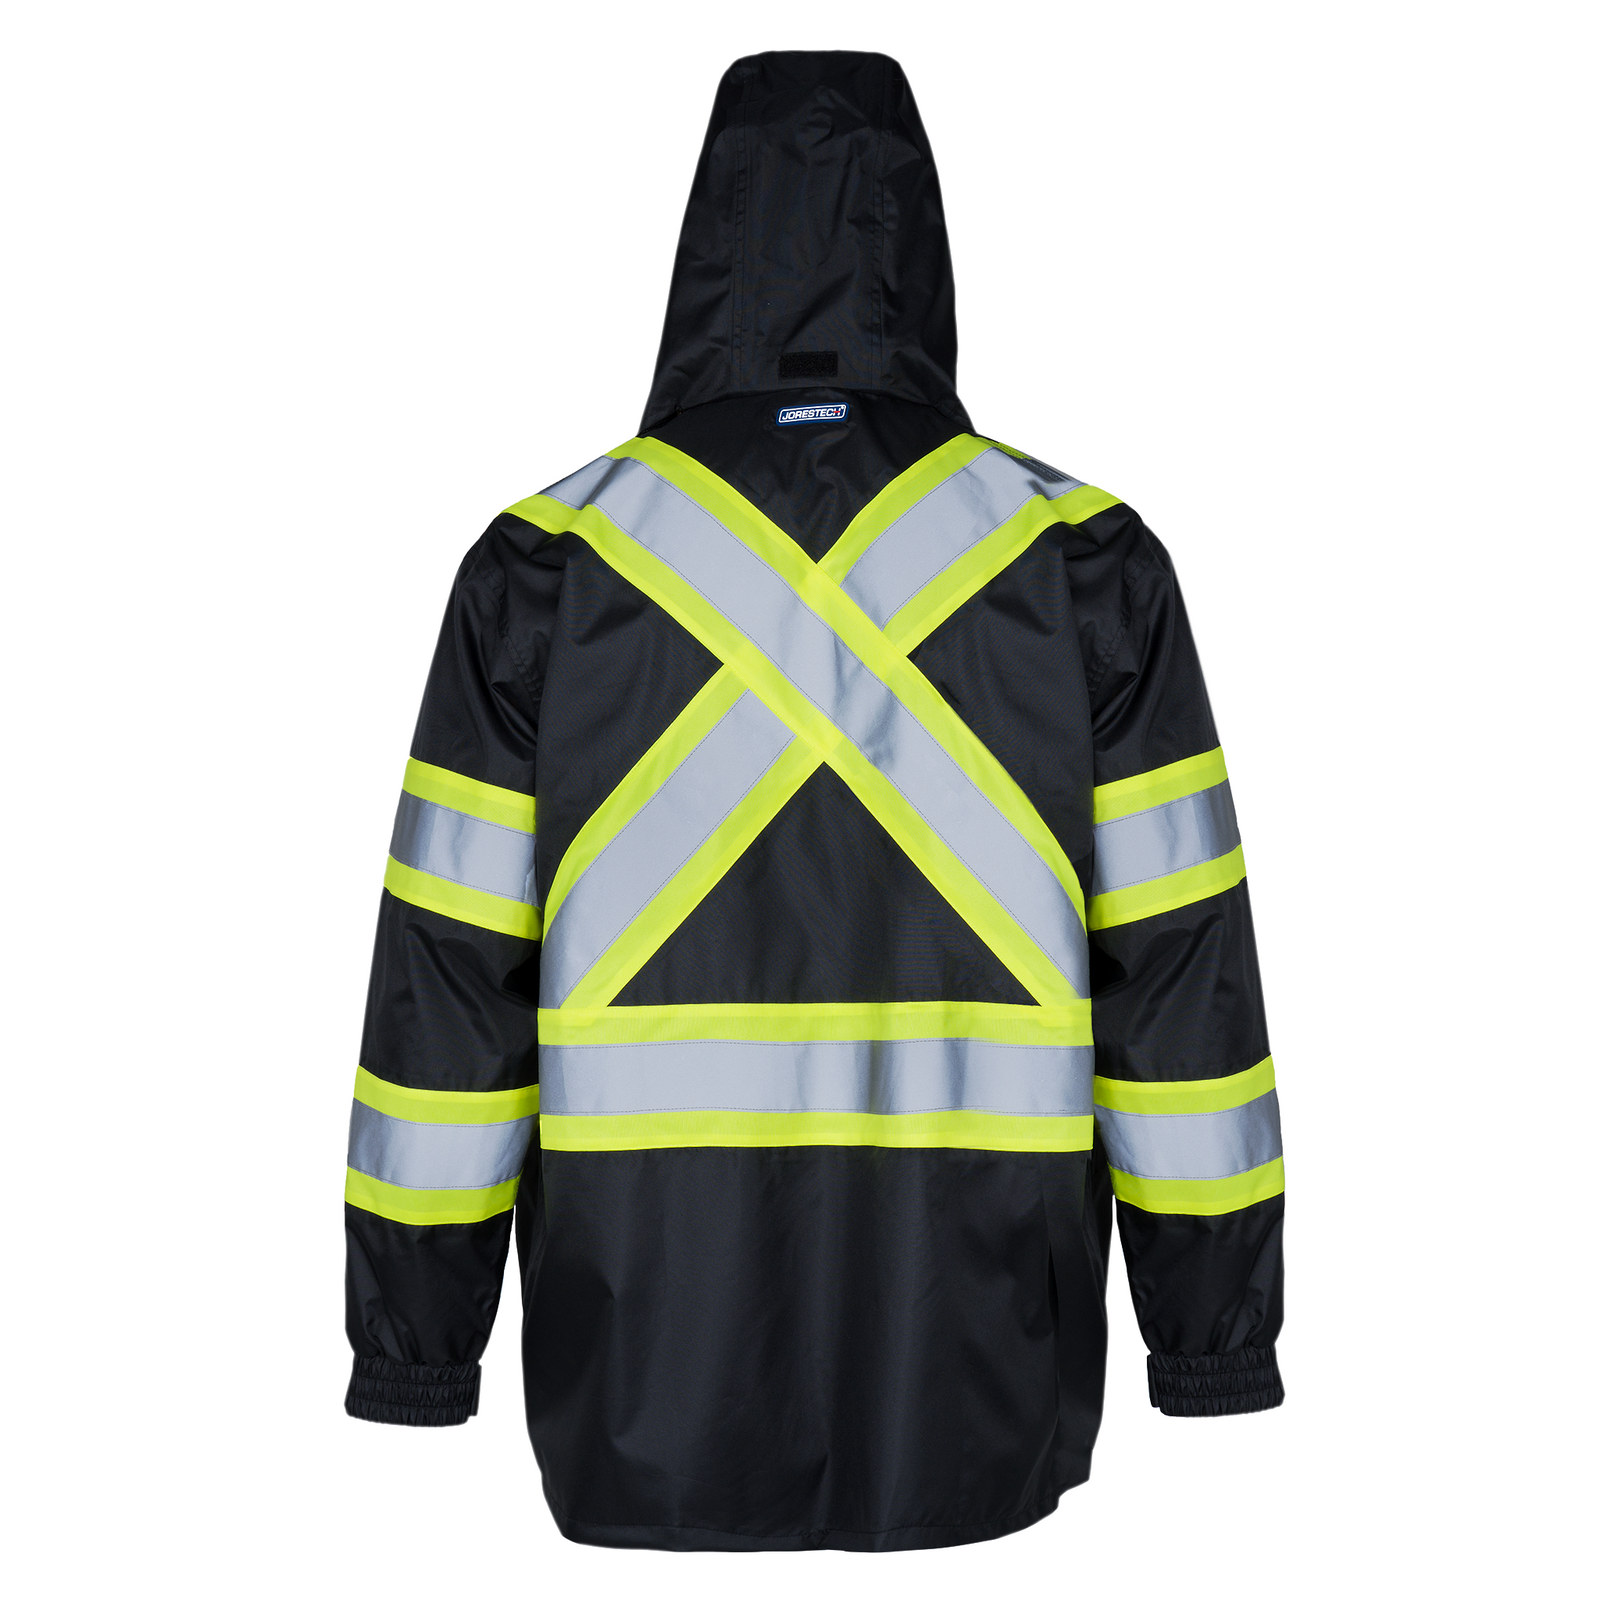 Black high visibility two tone safety rain jacket with X reflective stripes on the back and hoodie